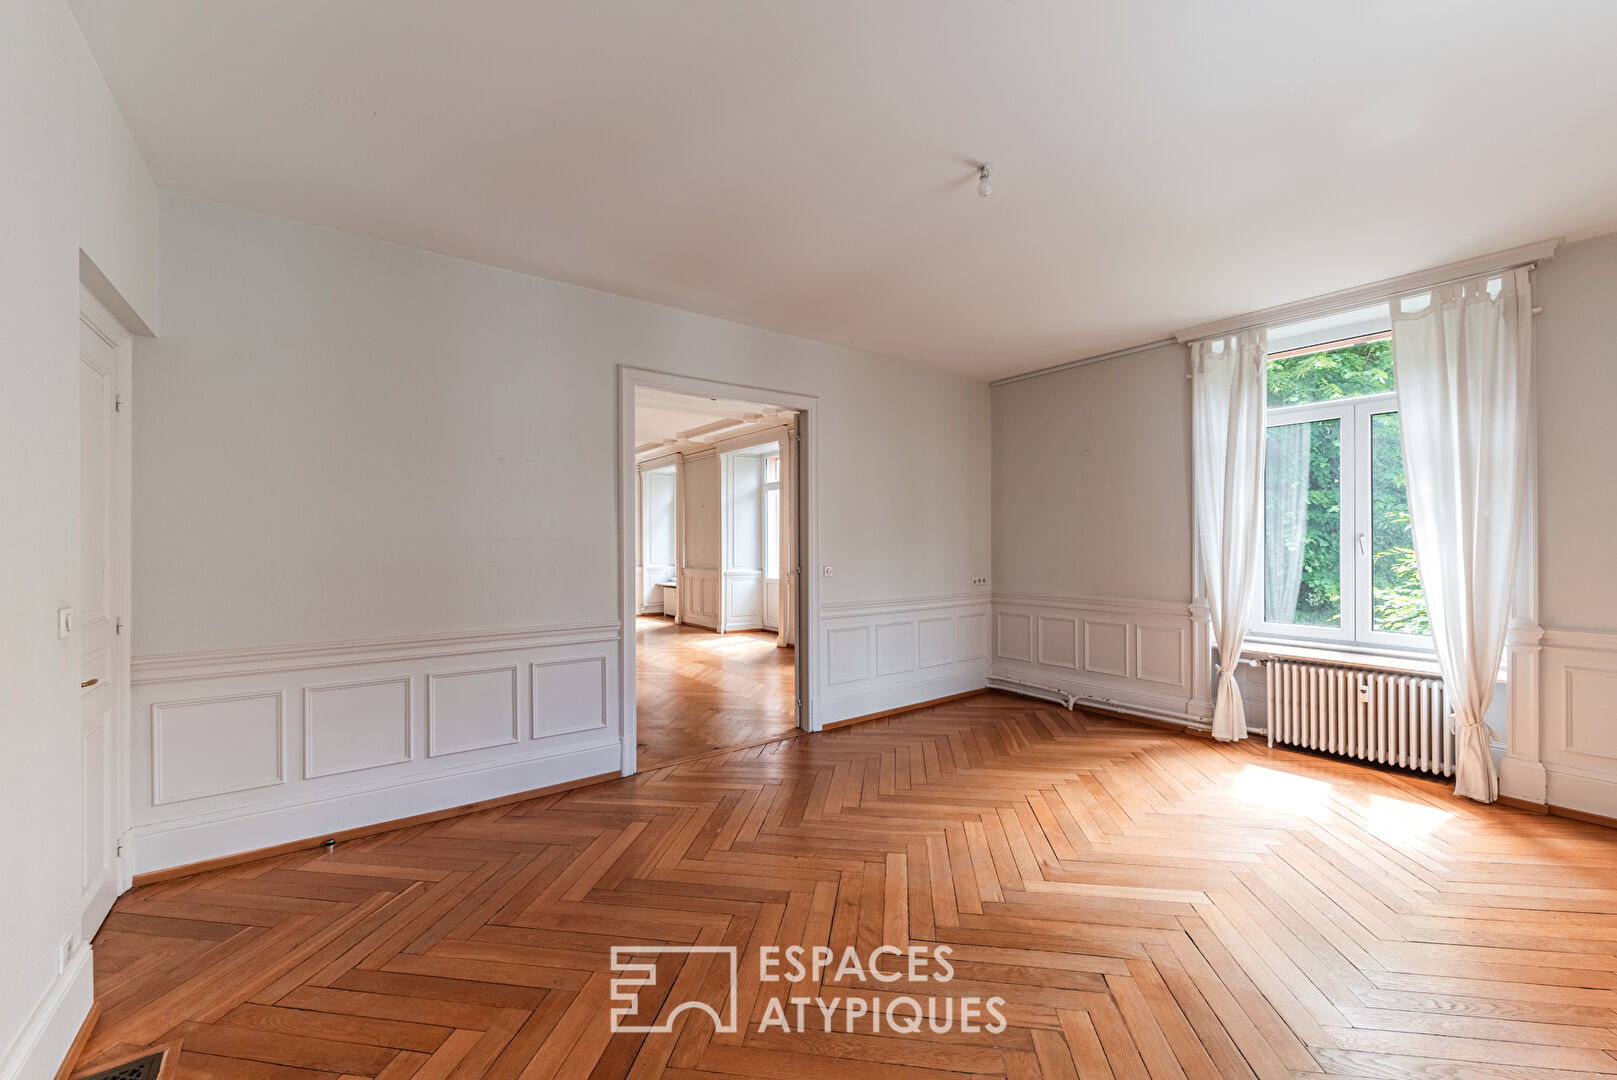 Bourgeois flat in a magnificent manor house